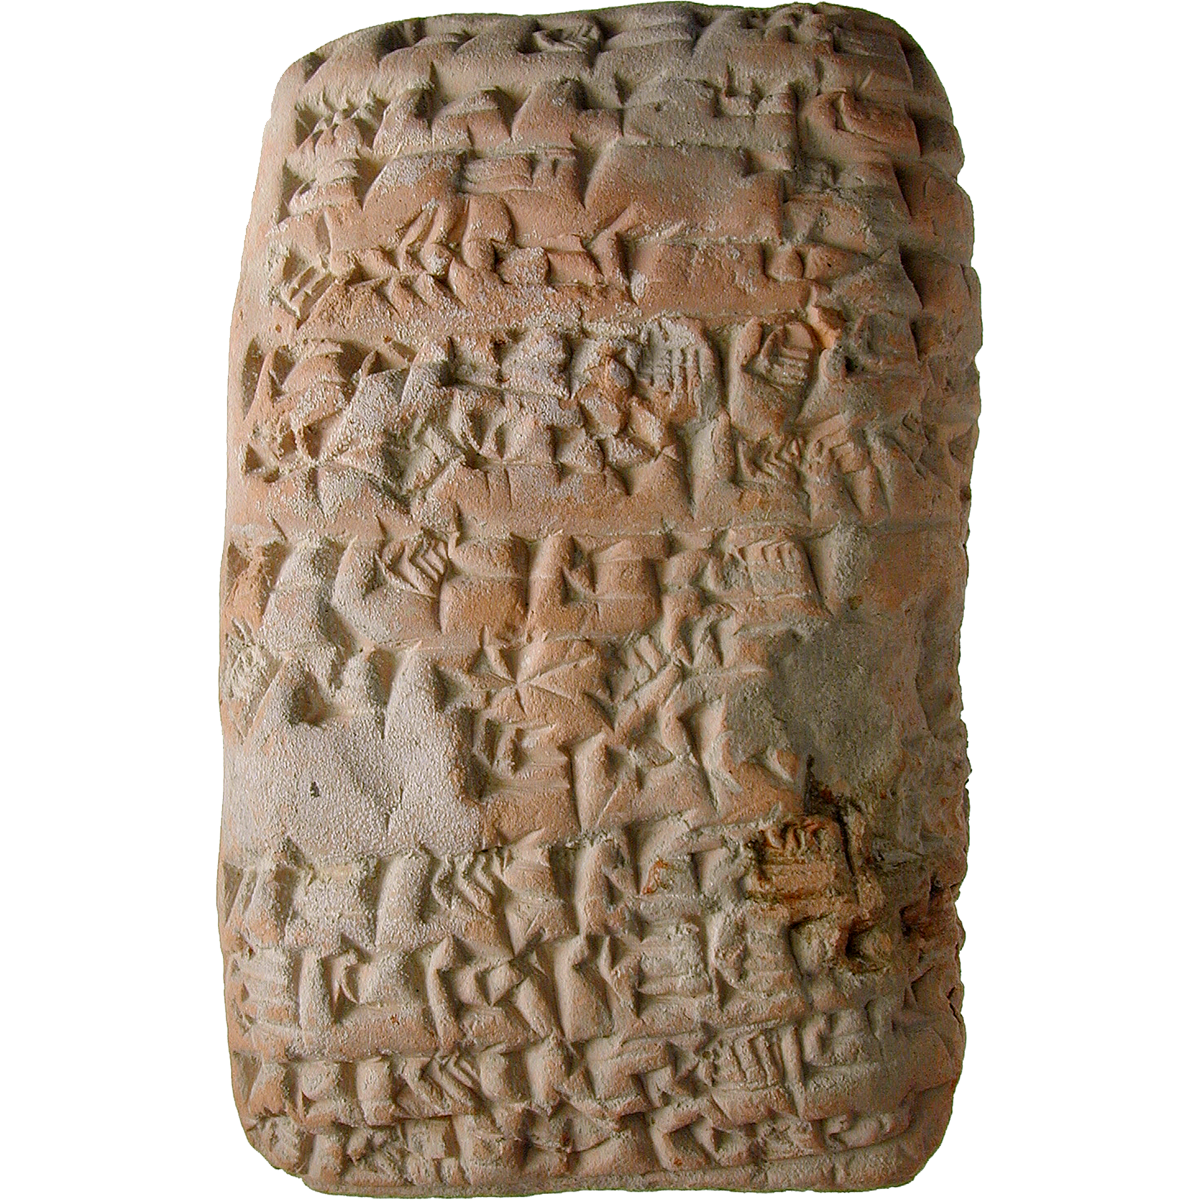 Mesopotamia, Old Akkadian Period, Clay Tablet with Cuneiform Writing (obverse)